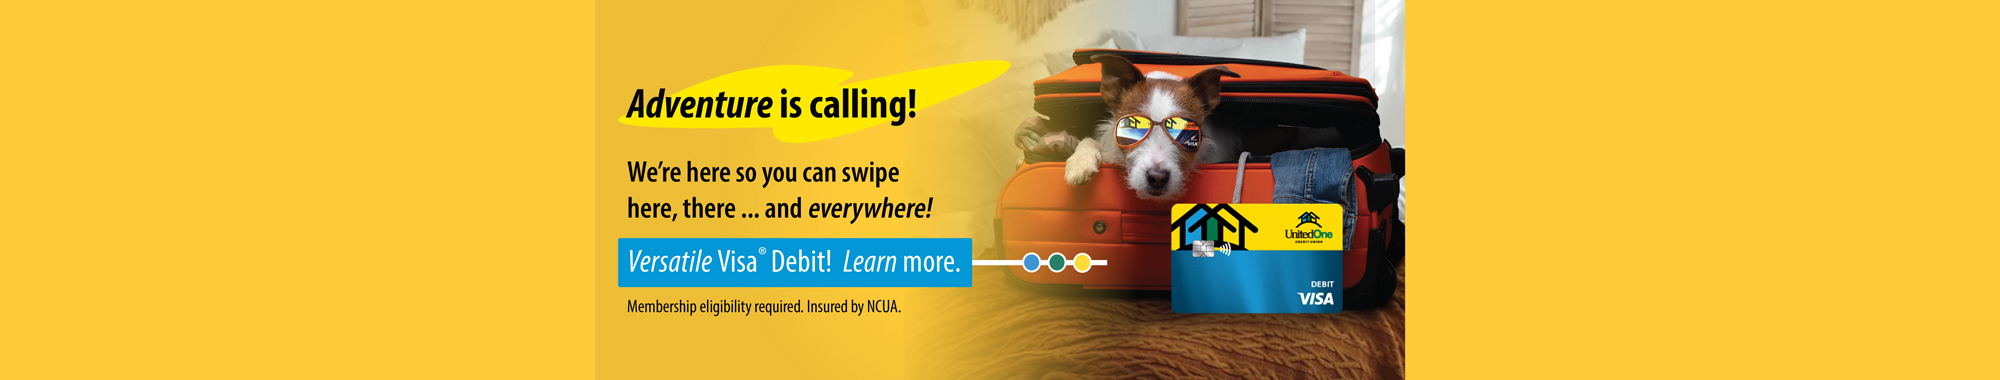 Adventure is calling! We're here so you can swipe here, there ... and everywhere! Versatile Visa Debit! Learn more.